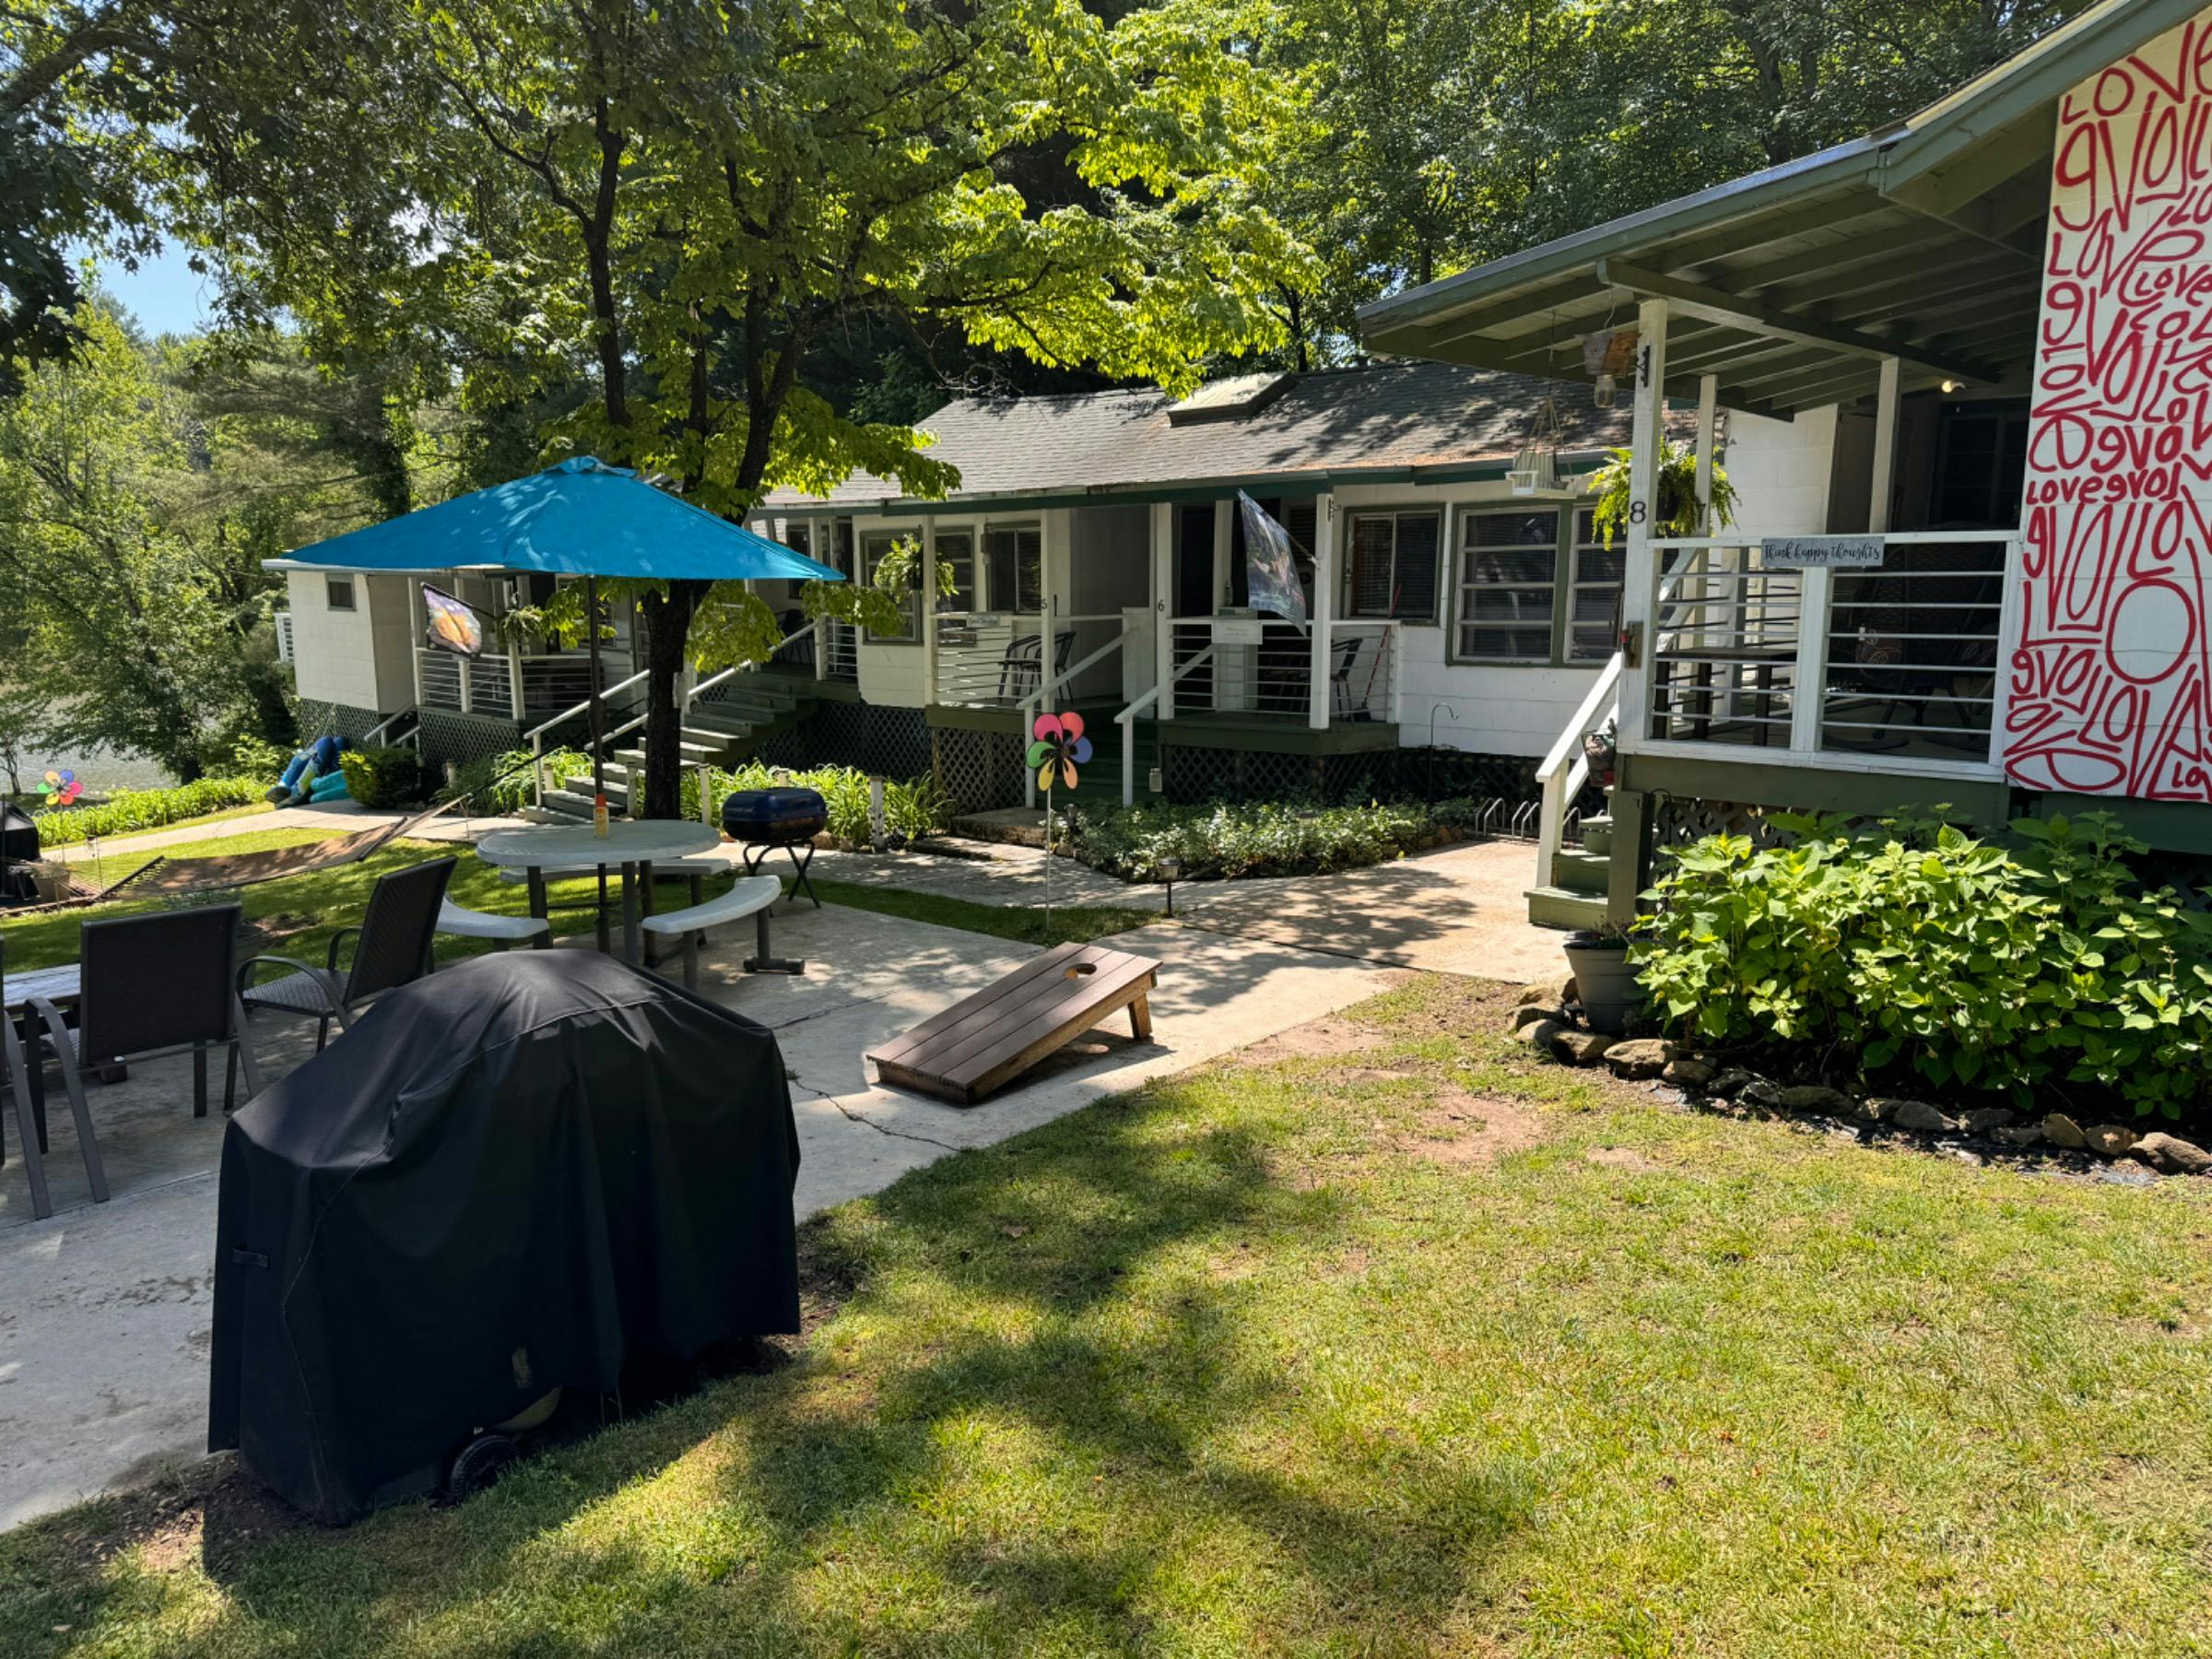 Shared area with picnic tables, corn hole, grills, hammock and fire pits.